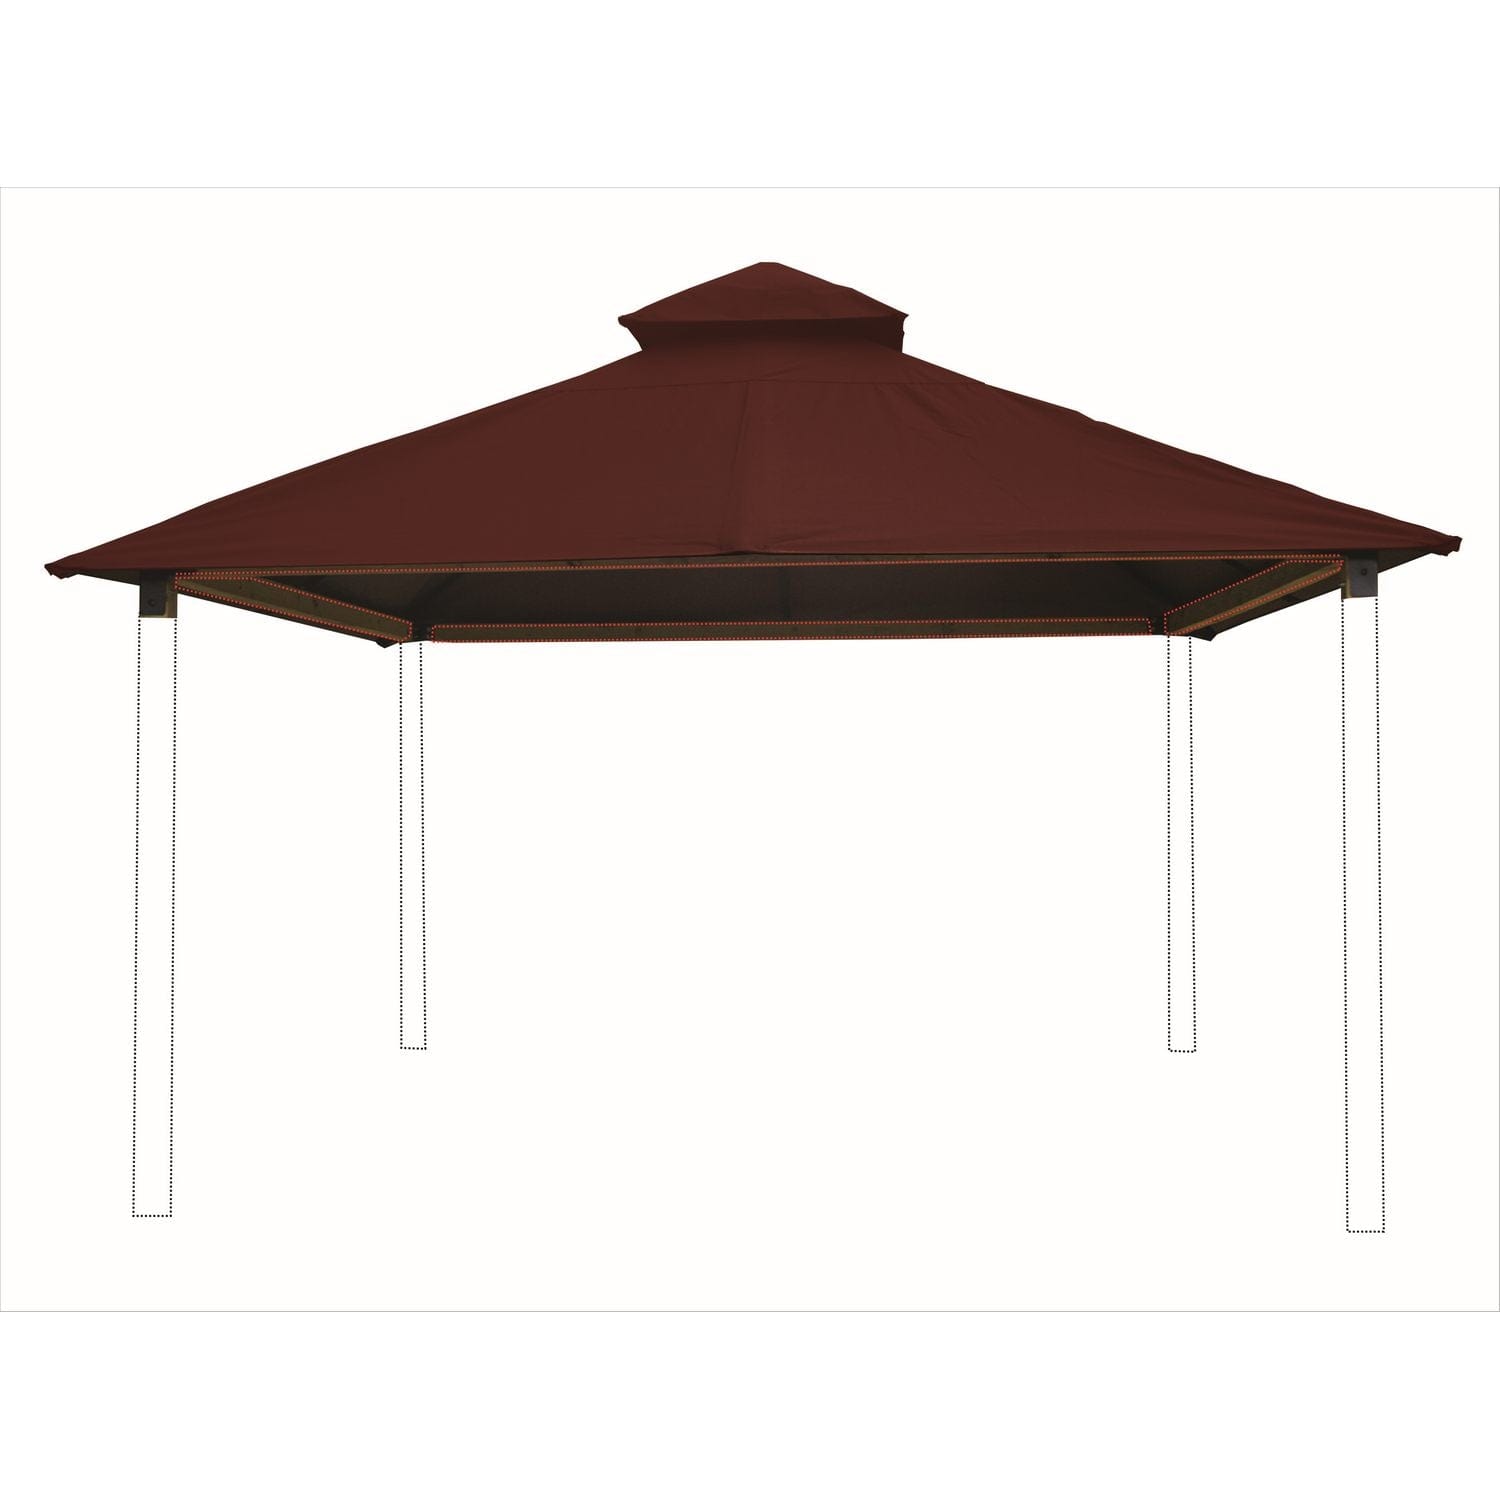 Riverstone Industries Soft Top Gazebos 12FT X 12FT Riverstone | ACACIA Gazebo Roof Framing and Mounting Kit With OutDURA Canopy - Burgundy AGOK12-BURGUNDY